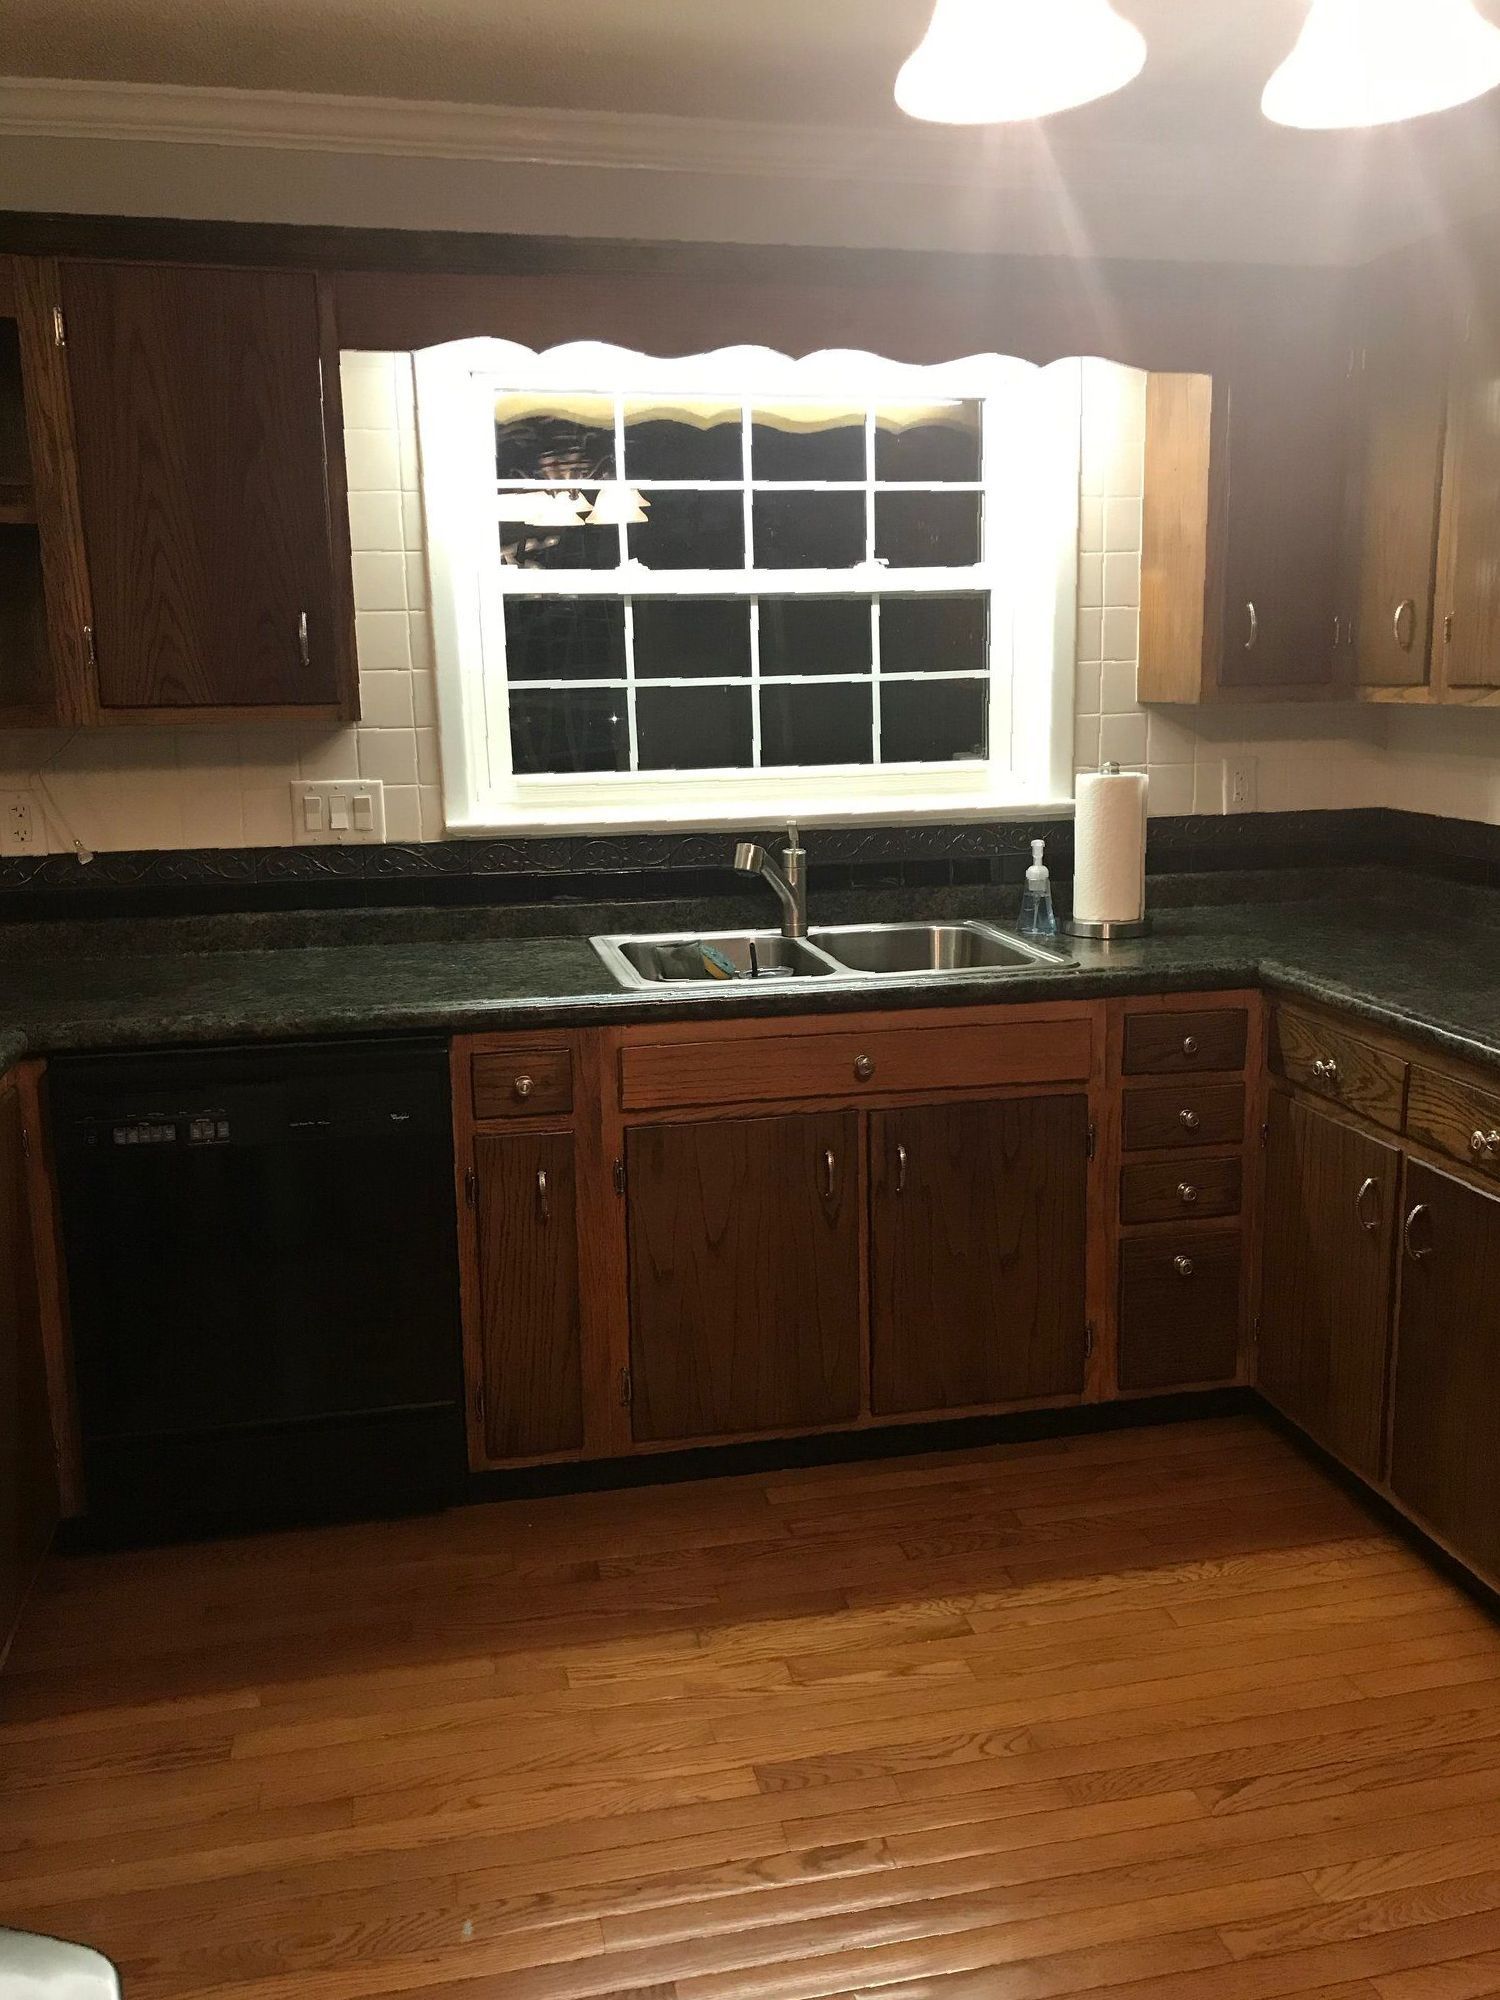 before and after kitchen